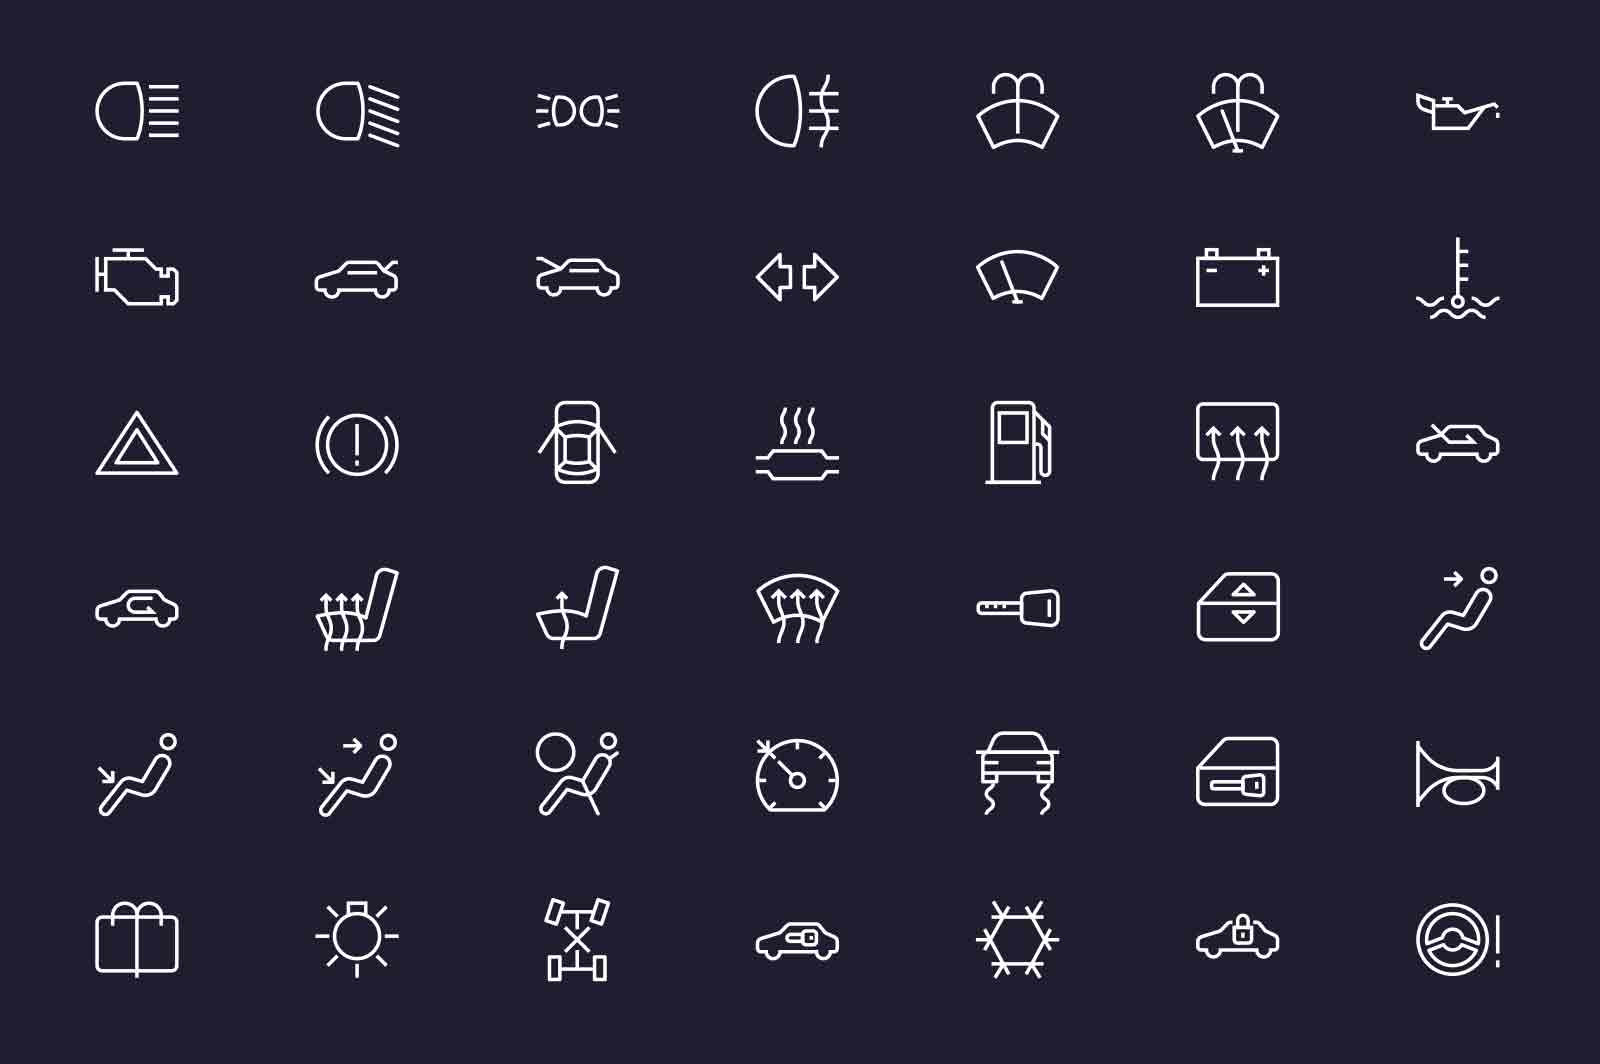 Dashboard with useful optimization icons set vector illustration. Auto related button linear icon. Dark background